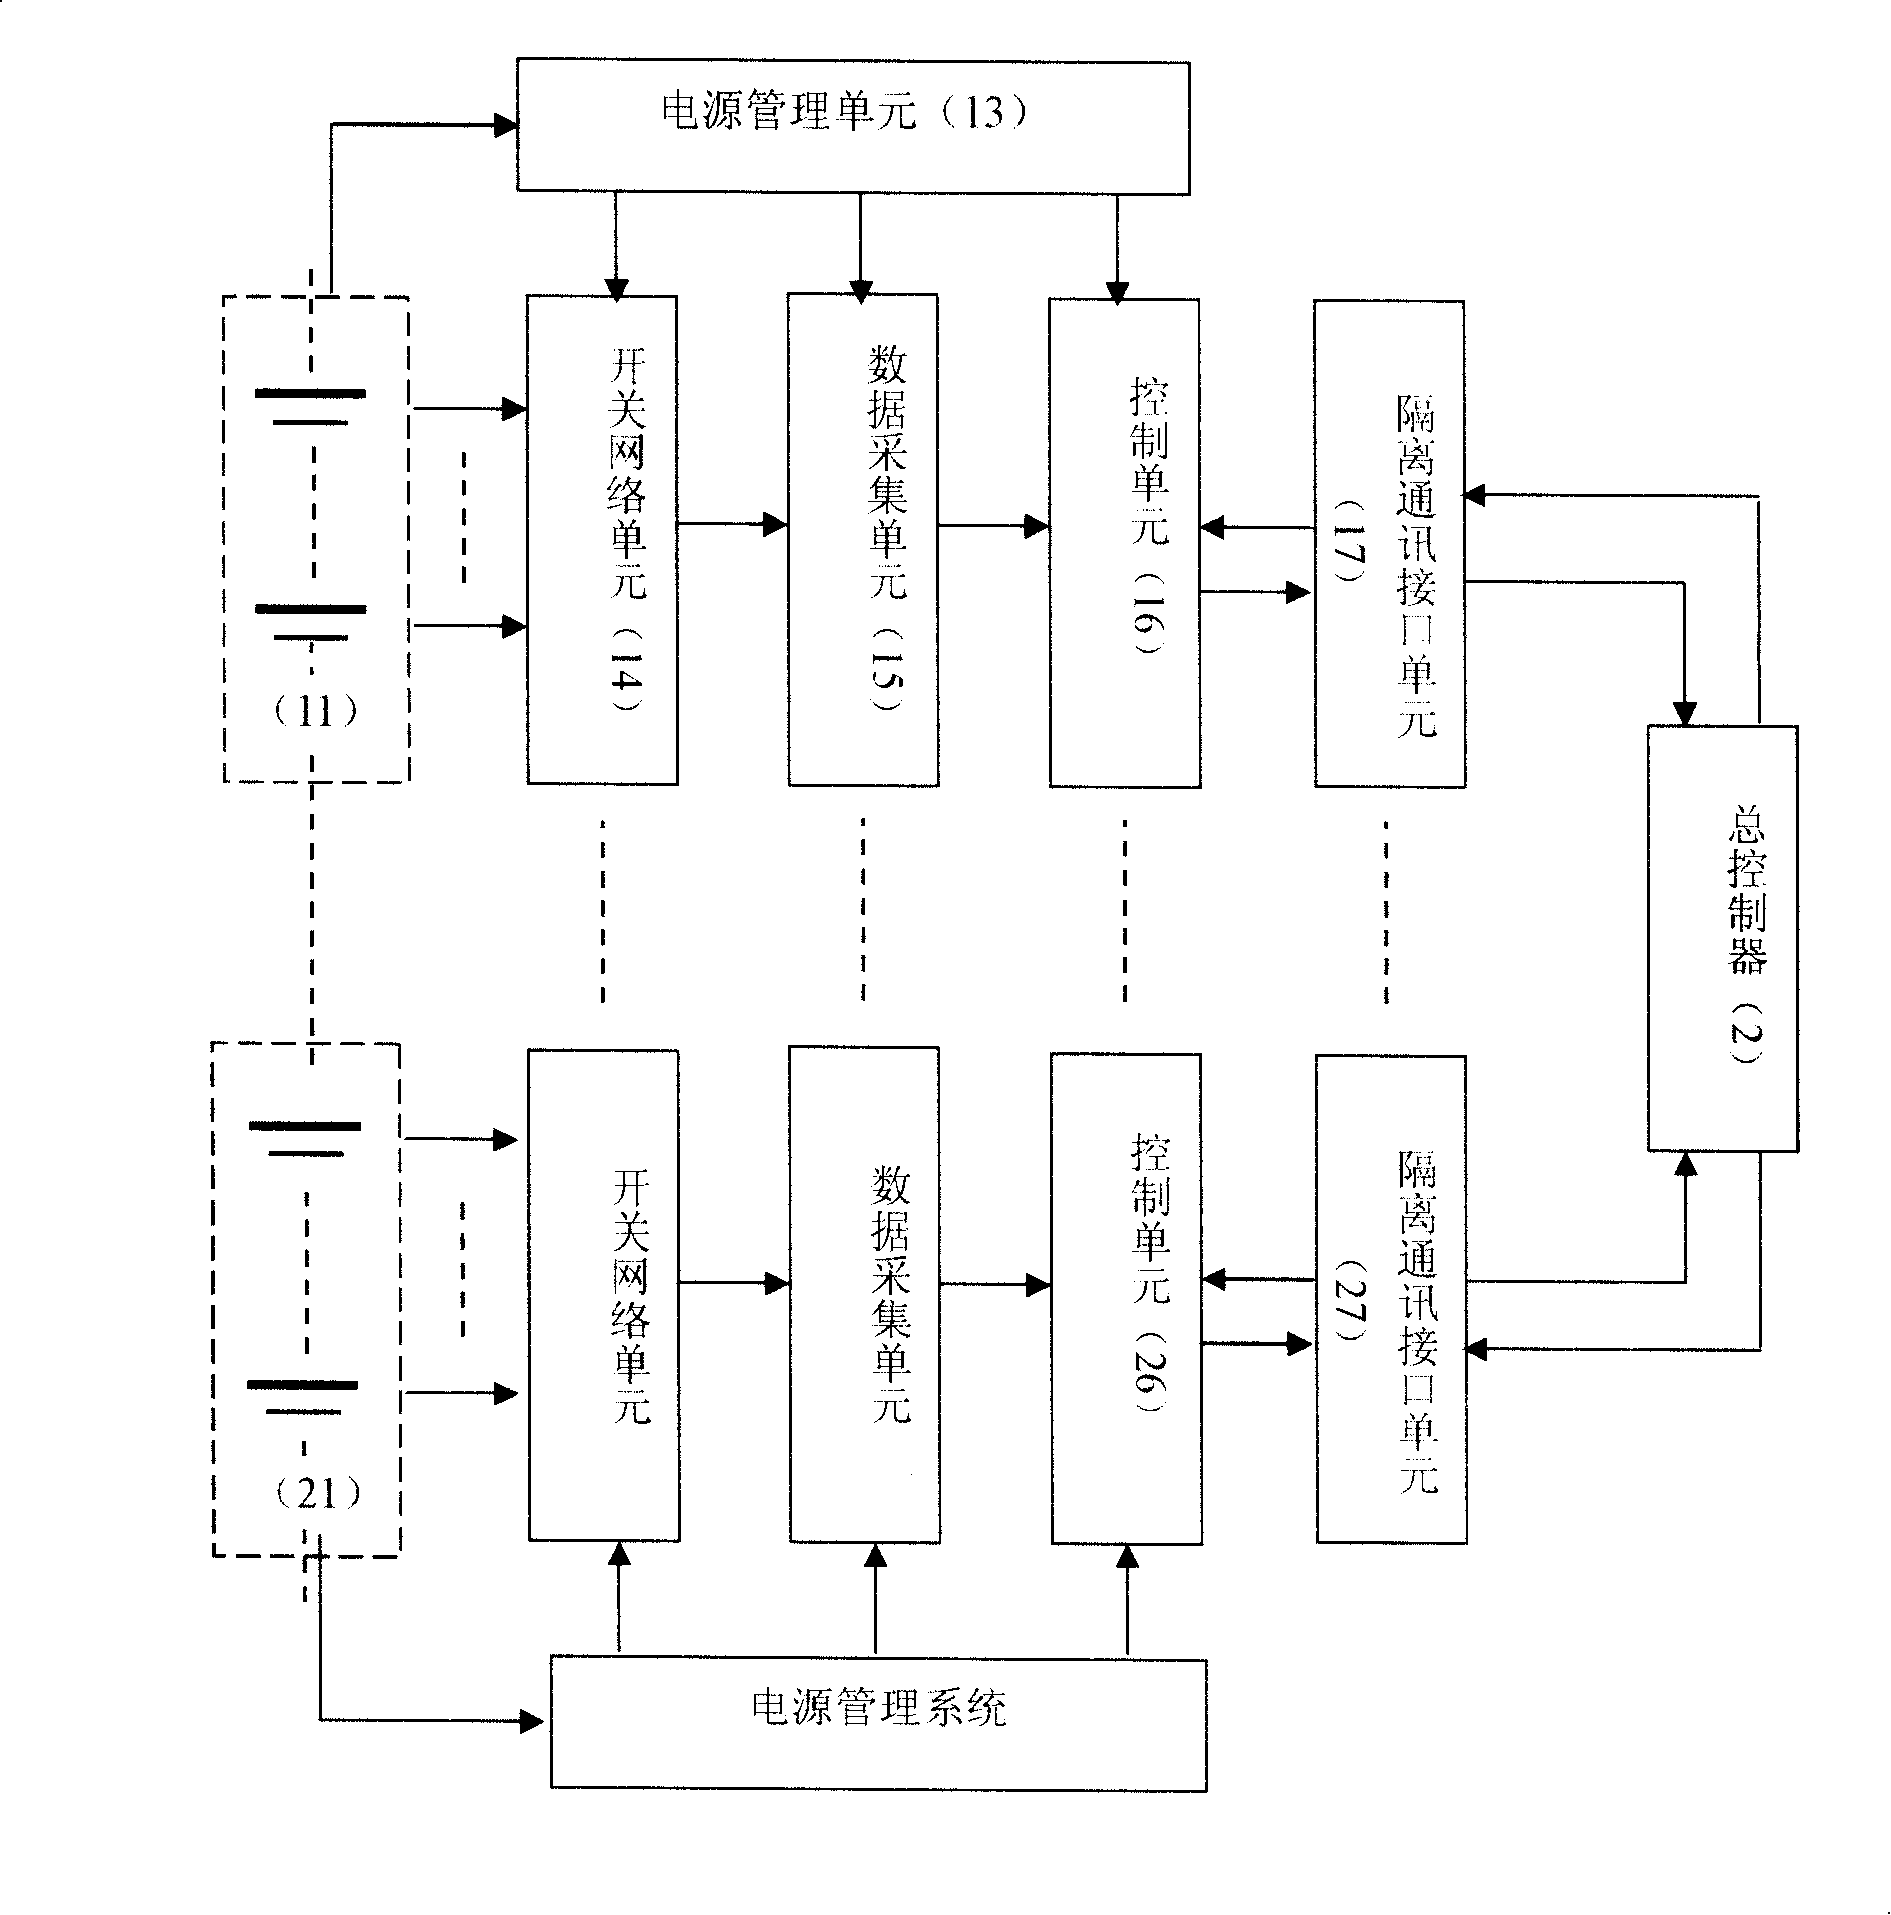 Fuel cell voltage monitoring system and its method